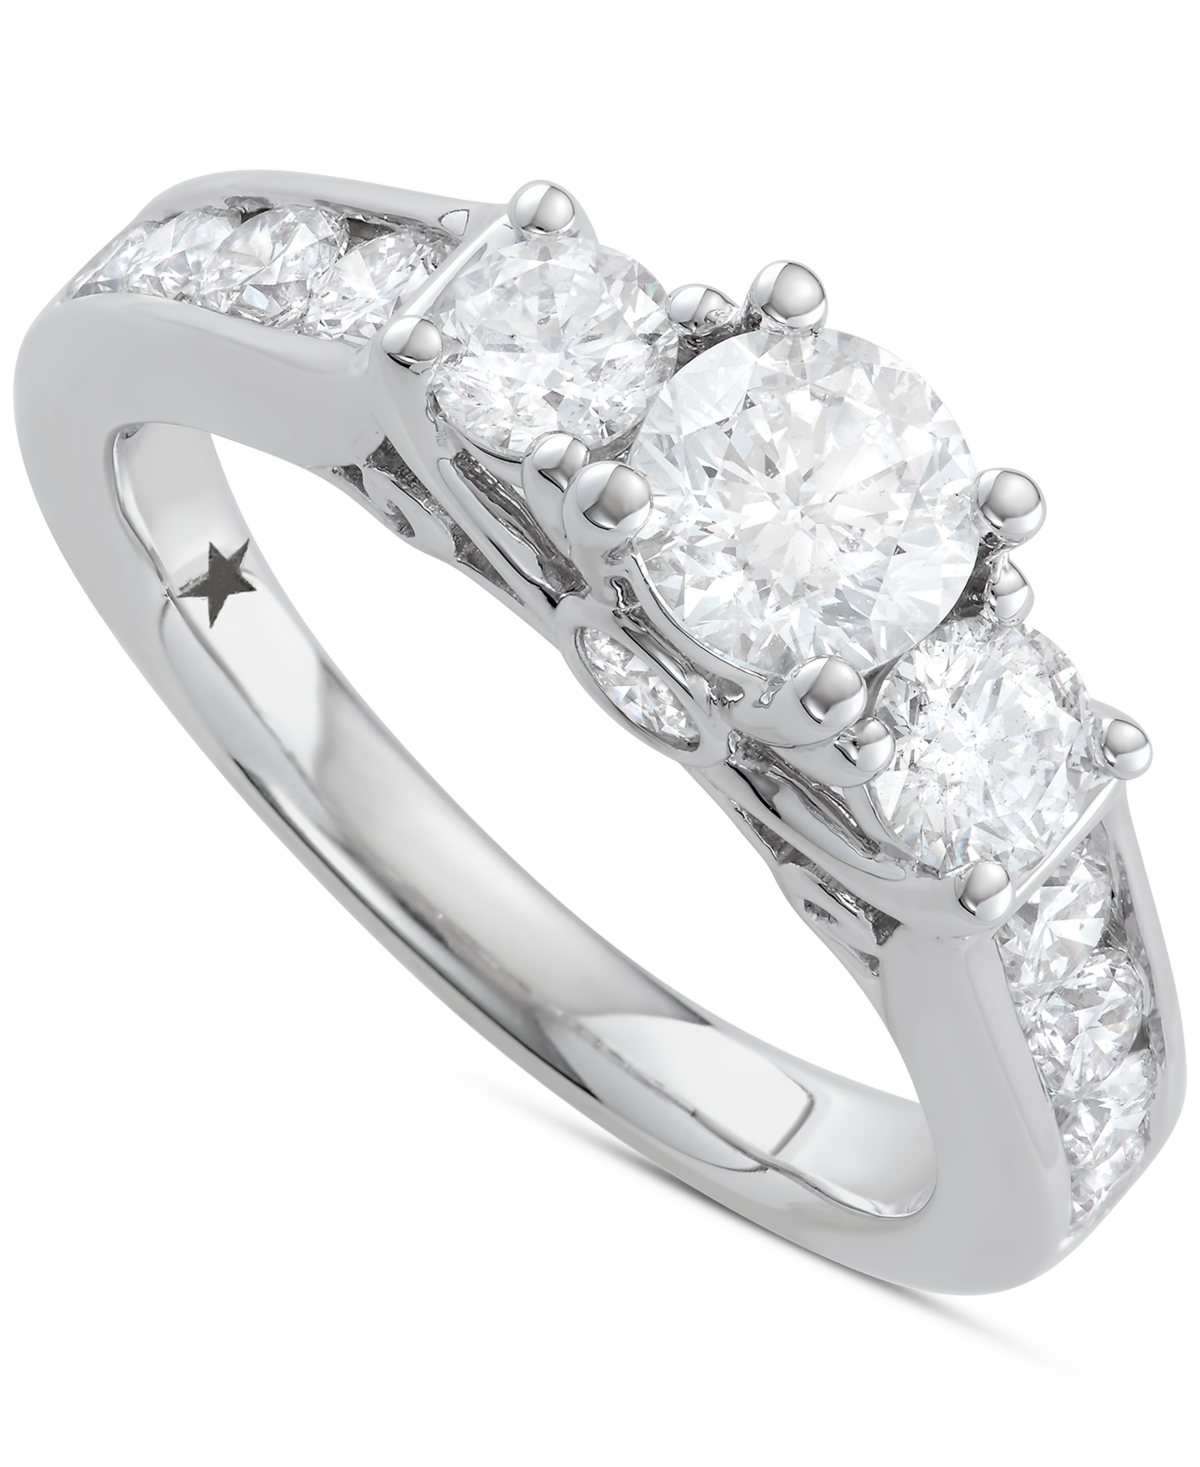 Diamond Channel-Set Engagement Ring (2 ct. t.w.) in 14k White Gold - White Gold